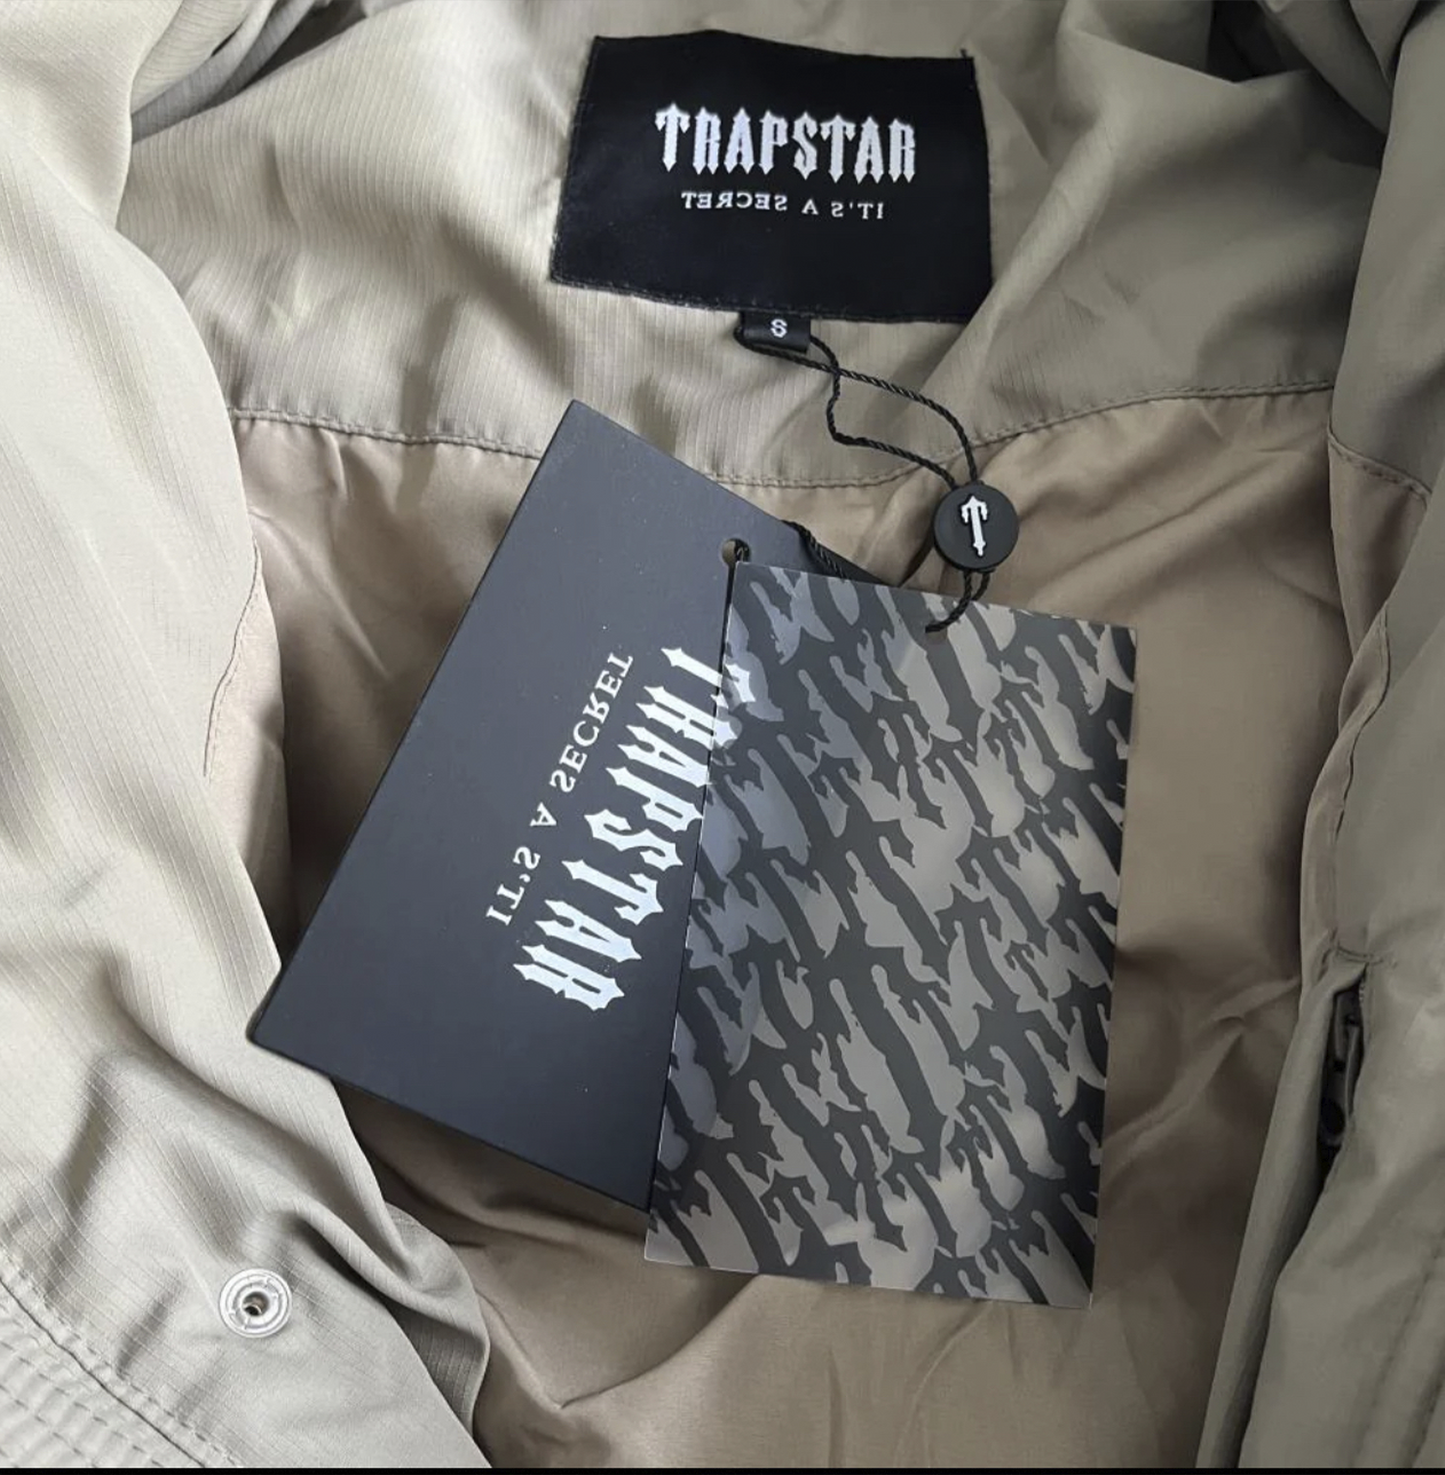 TRAPSTAR DECODED HOODED PUFFER 2.0 -BRINDLE